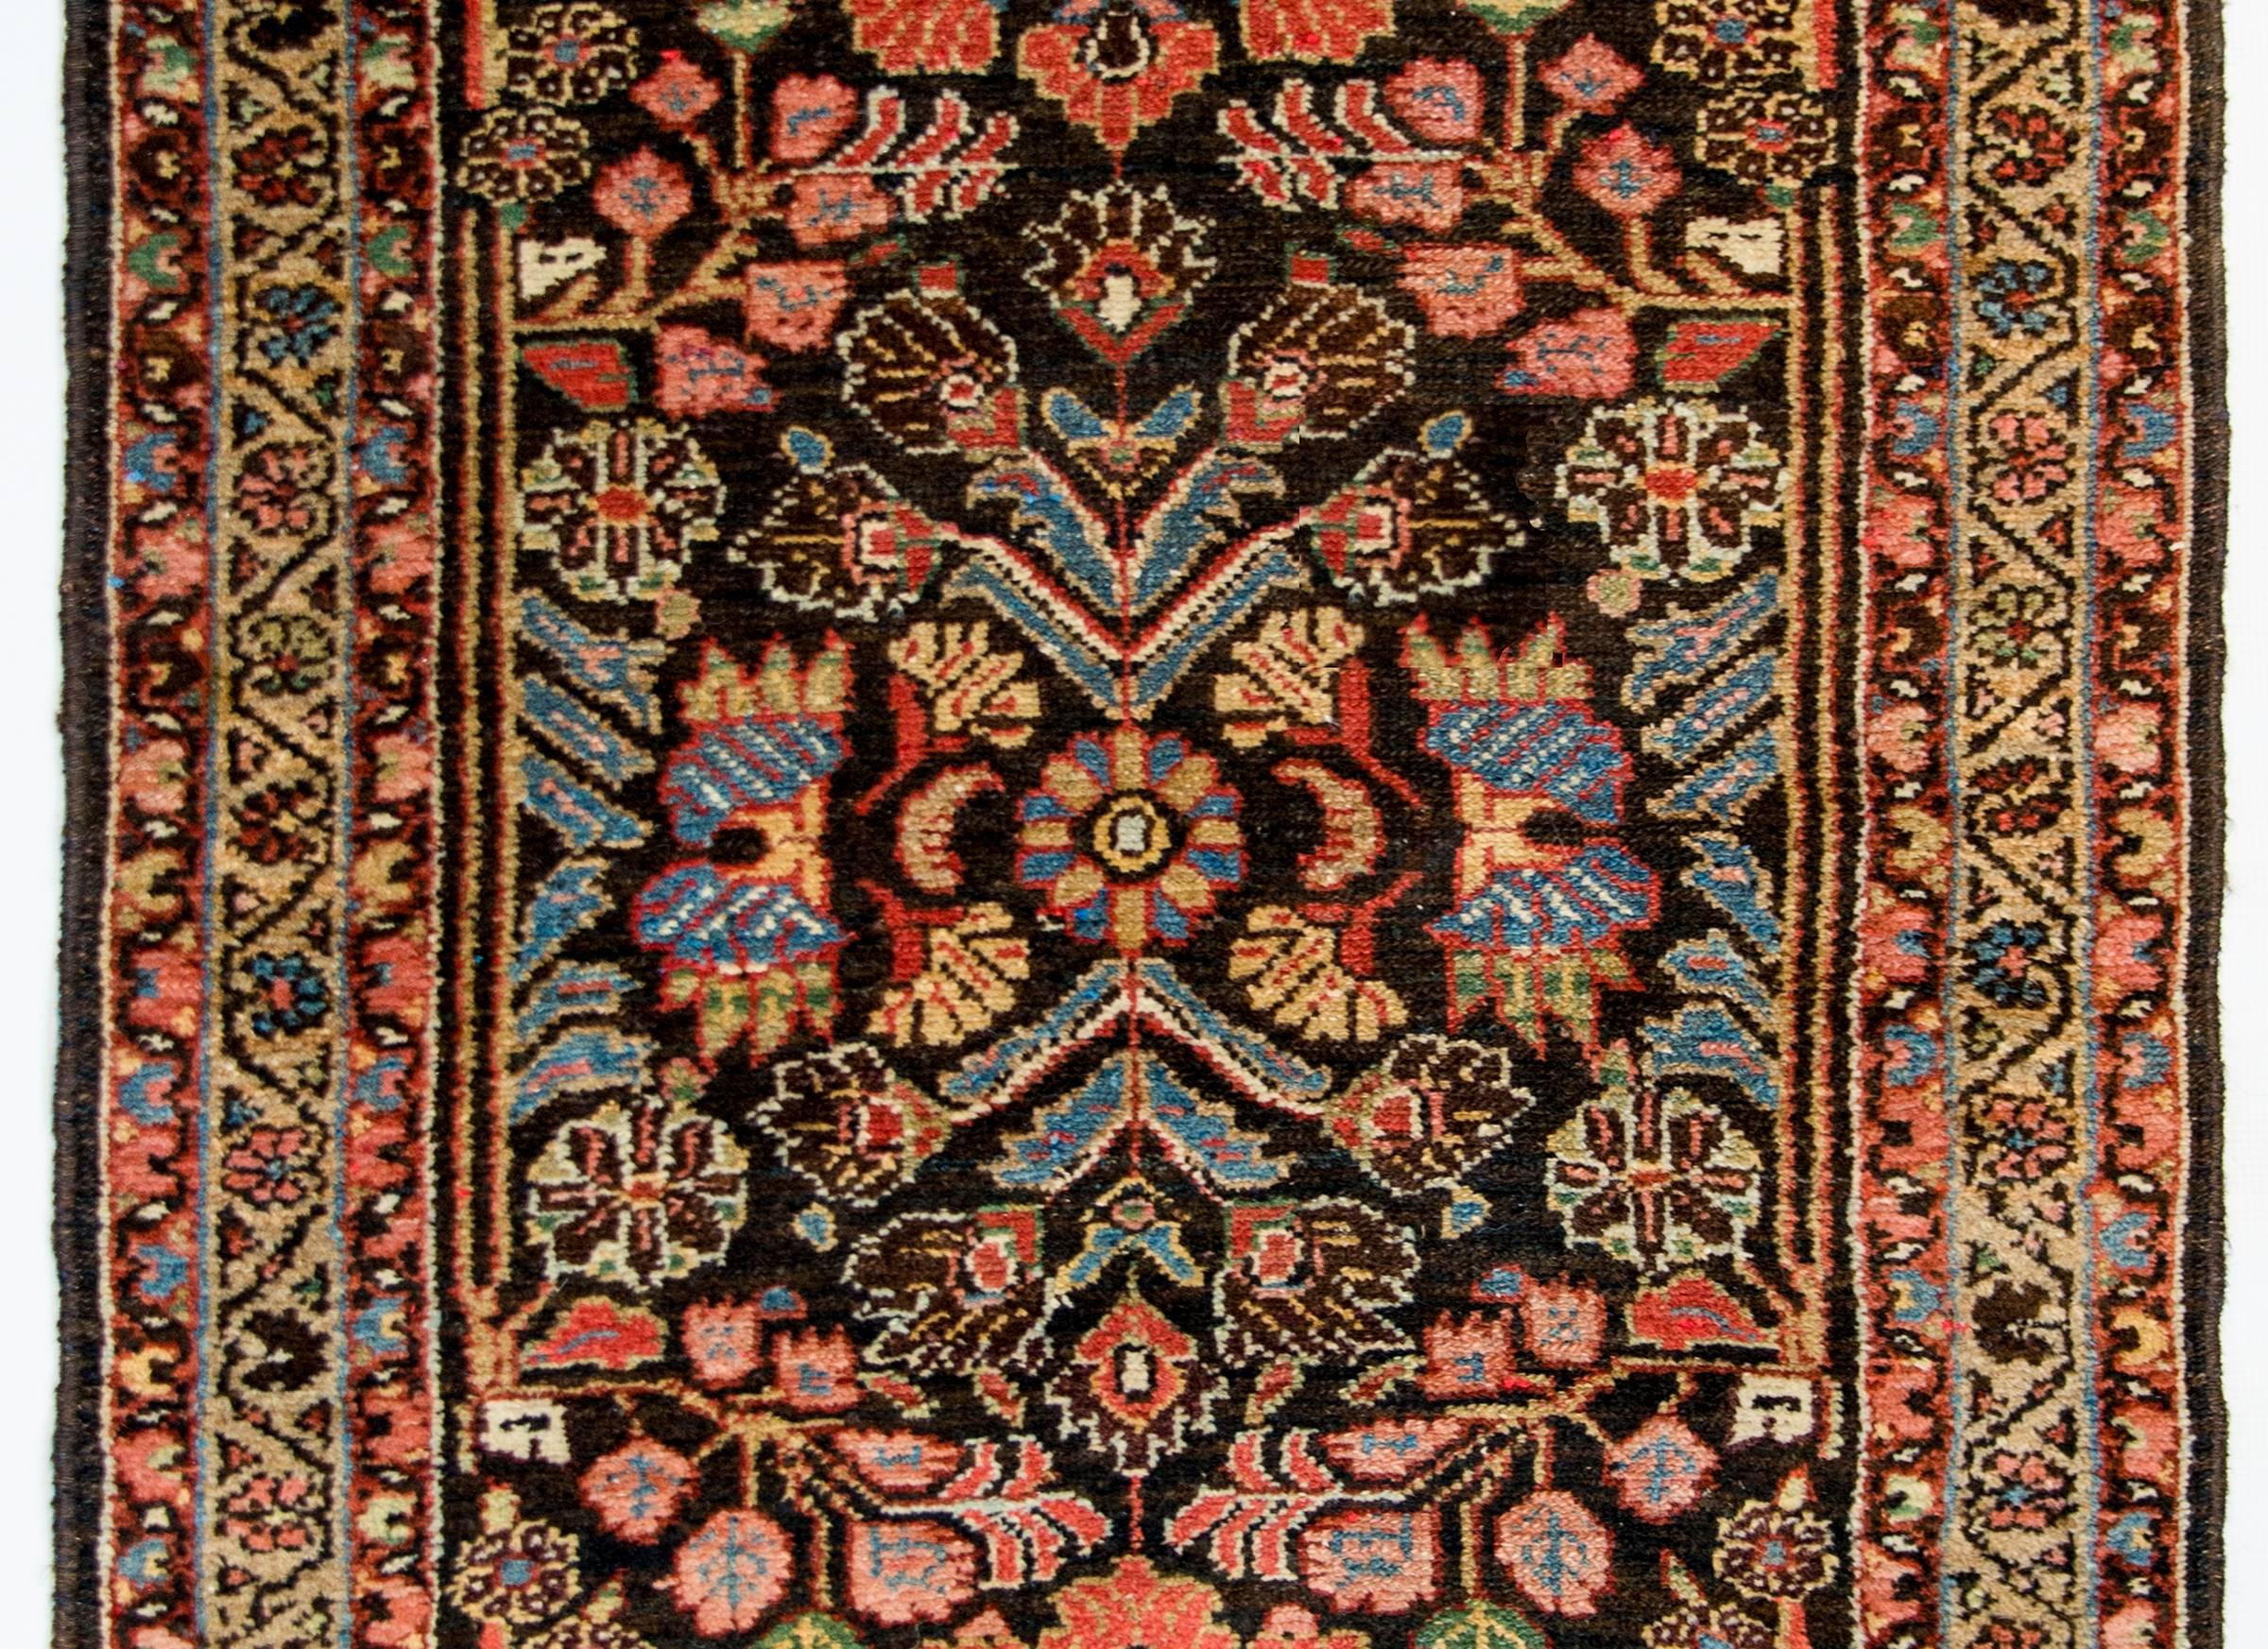 A fantastic early 20th century Persian Malayer rug with a mirrored multicolored floral and leaf pattern woven in indigo, crimson, pink, green, and white on a dark indigo background. The border is composed with one central floral stripe on a gold